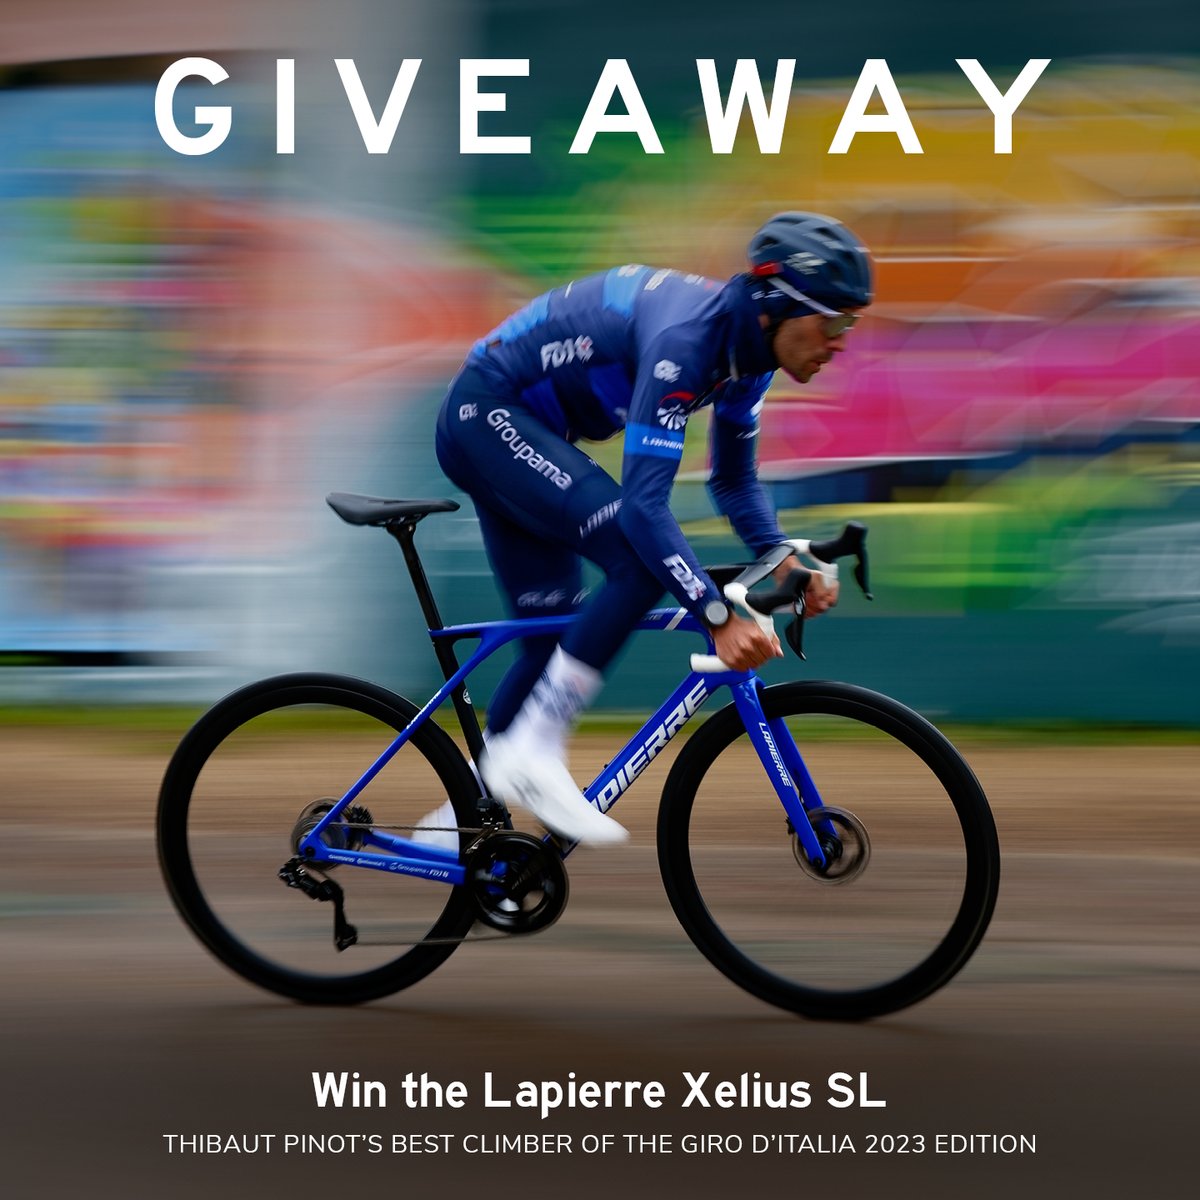 GIVEAWAY ALERT! Calling all @ThibautPinot's cycling fans! 🎉🚴‍♀️ We are giving away Thibaut Pinot's exclusive Xelius SL Best Climber of the Giro 2023, unique world edition. Hit the link to participate through our Instagram account: instagram.com/p/C0wBoA6Mr-j/